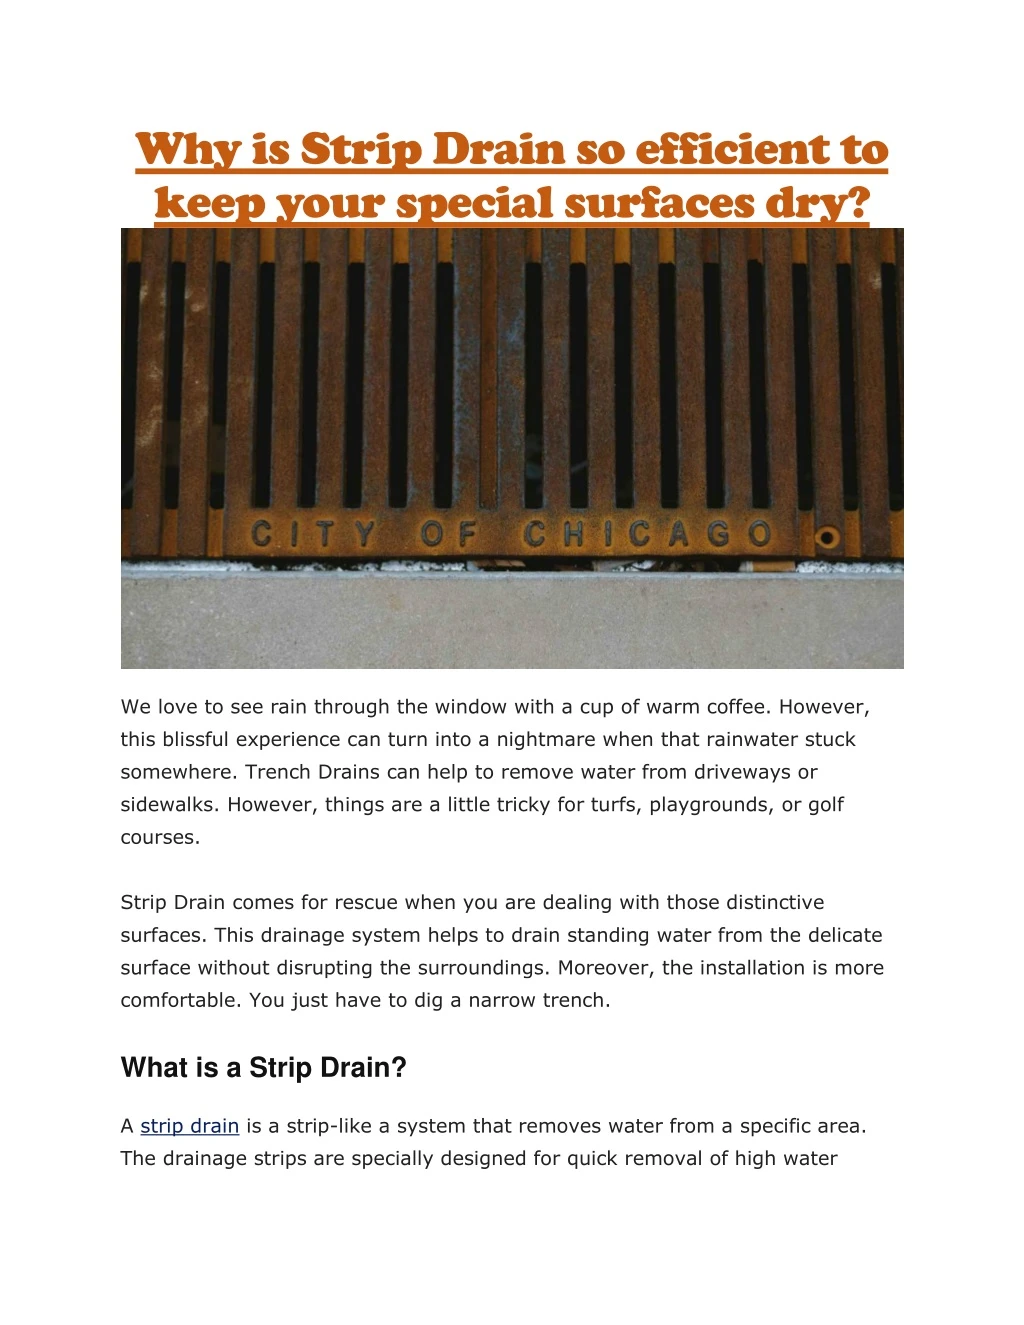 why is strip drain so efficient to keep your